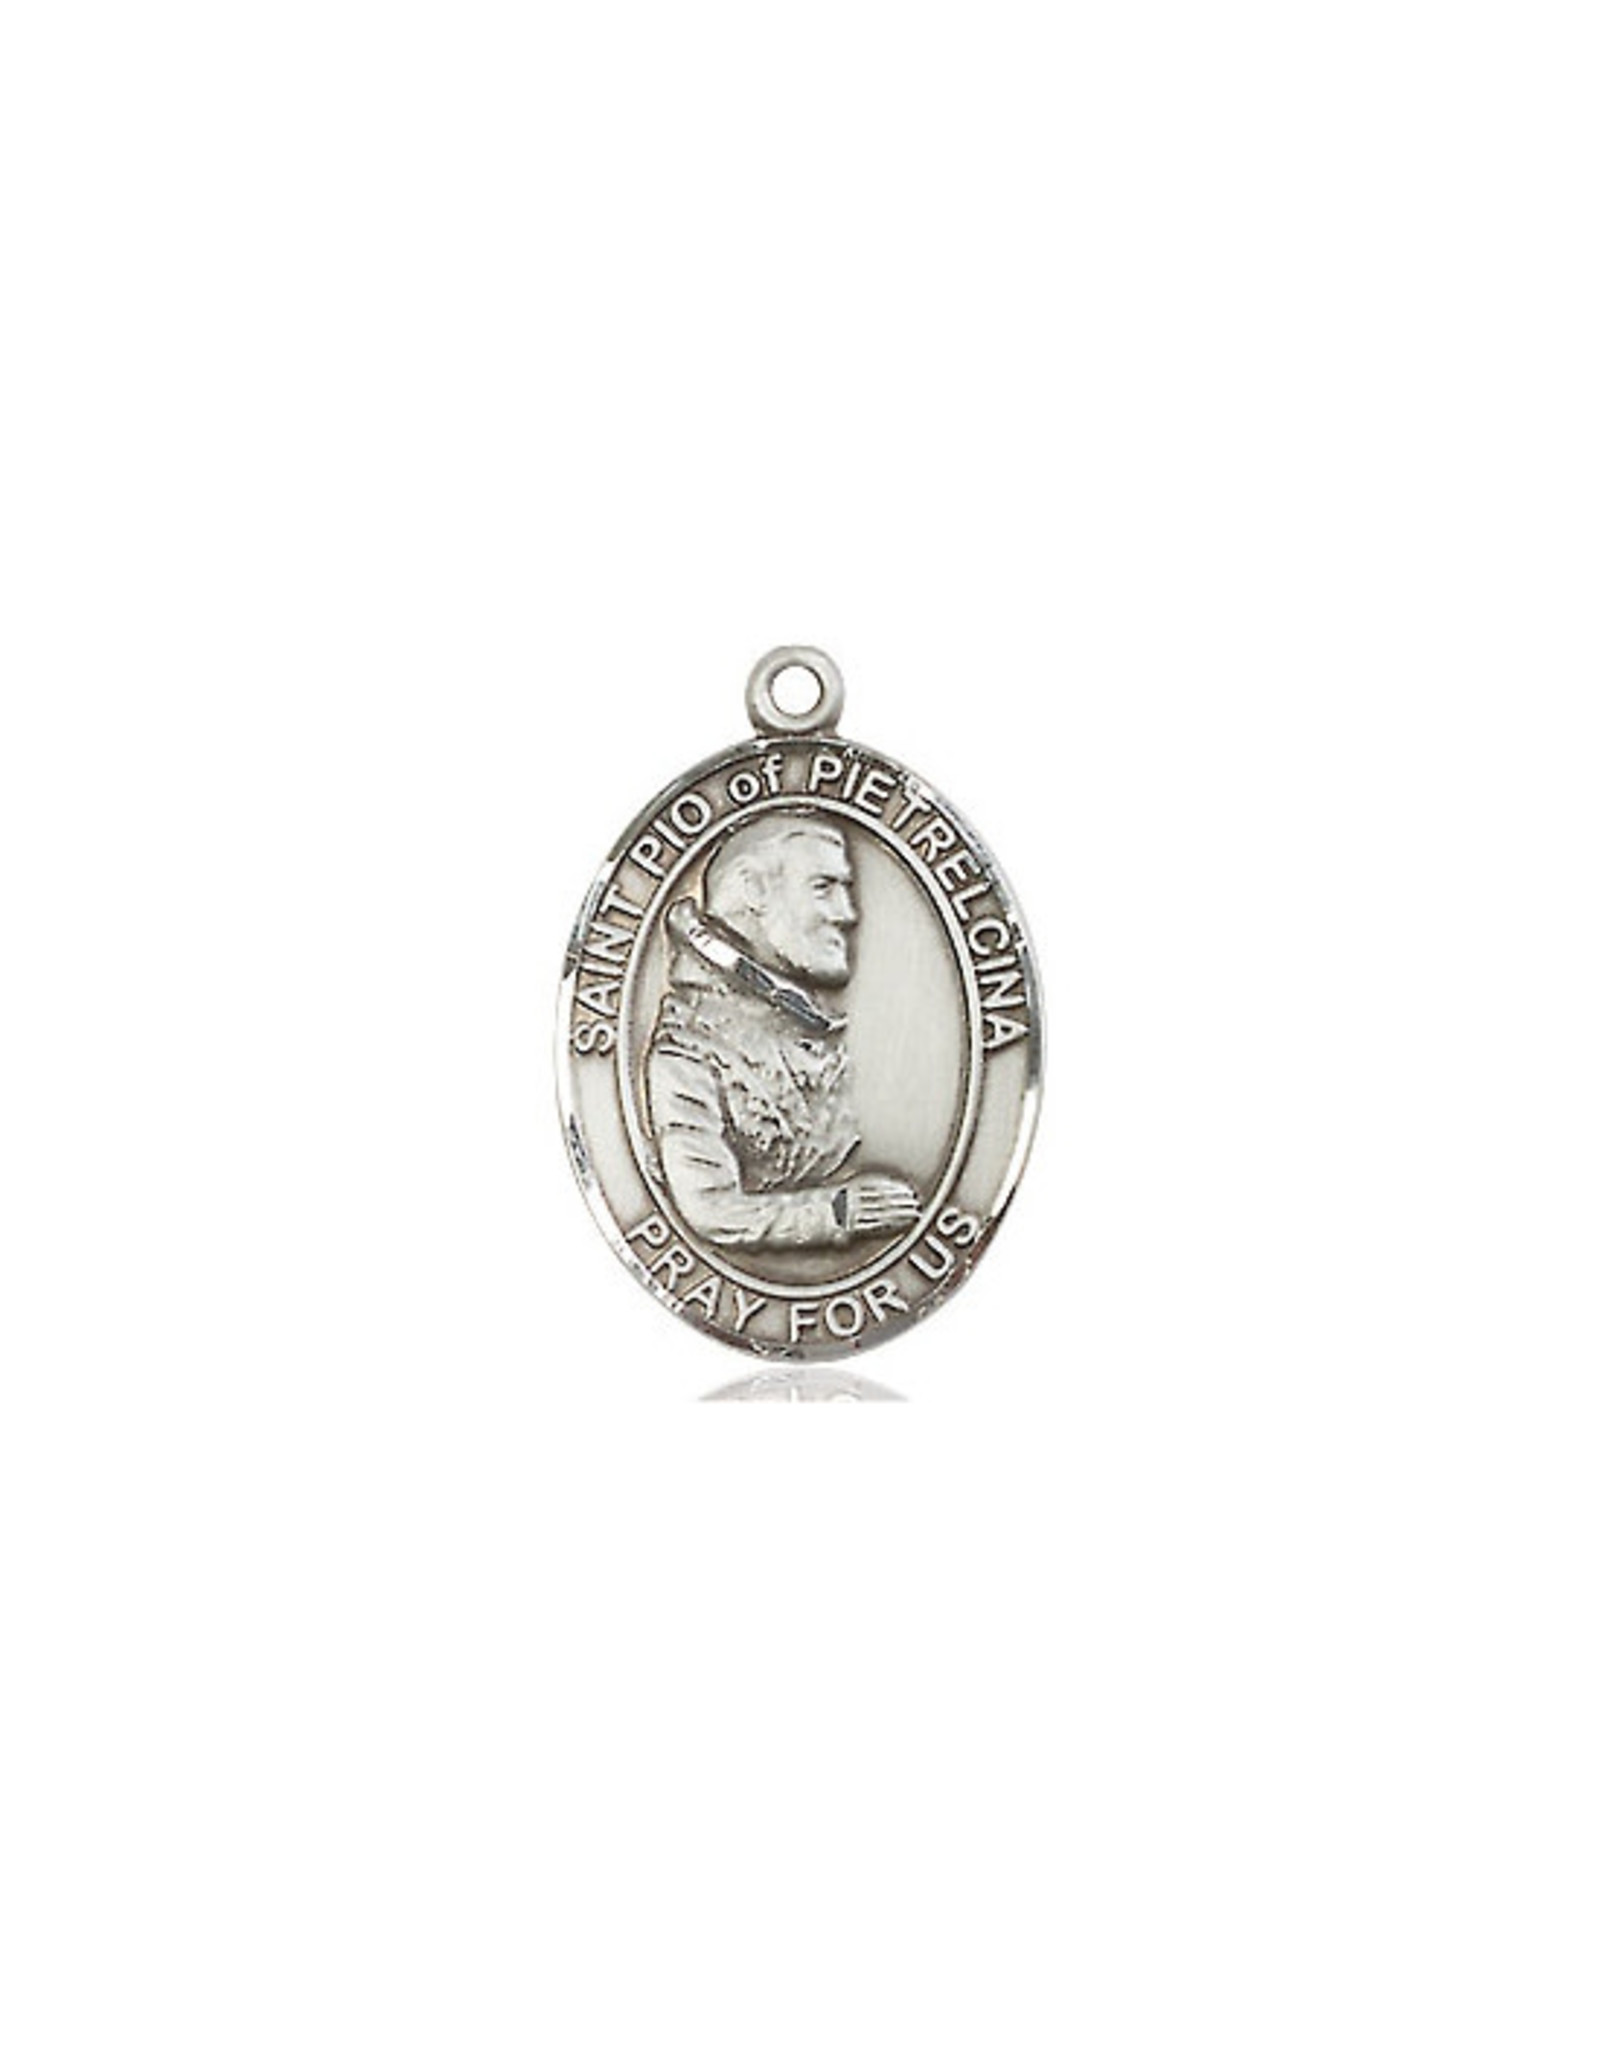 Bliss St. Padre Pio of Pietrelcina Medal, Sterling Silver